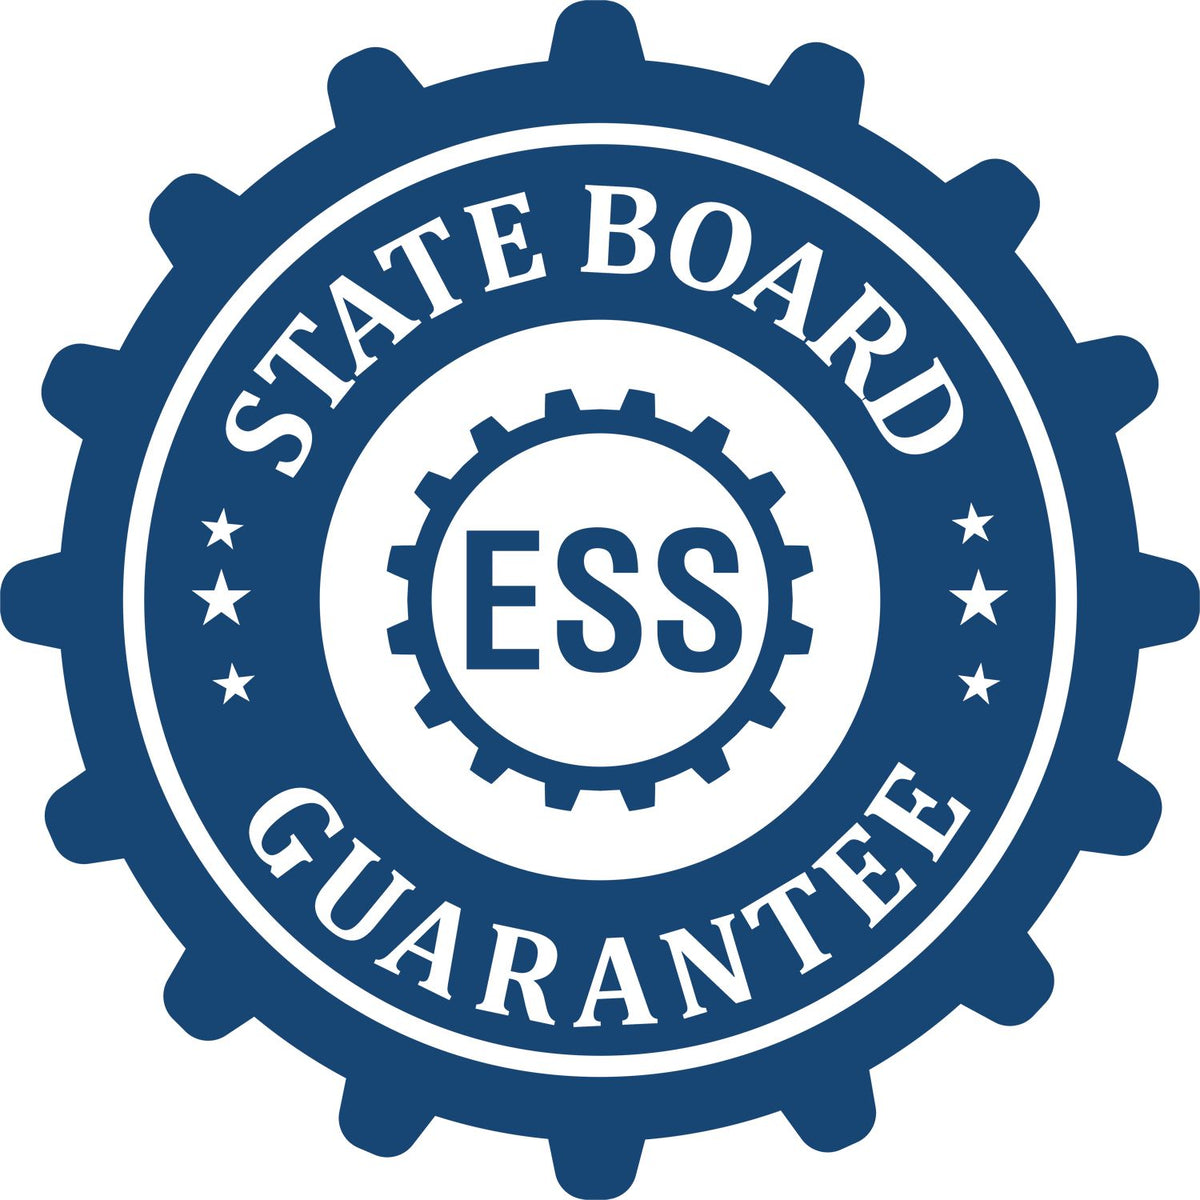 An emblem in a gear shape illustrating a state board guarantee for the Hybrid New York Geologist Seal